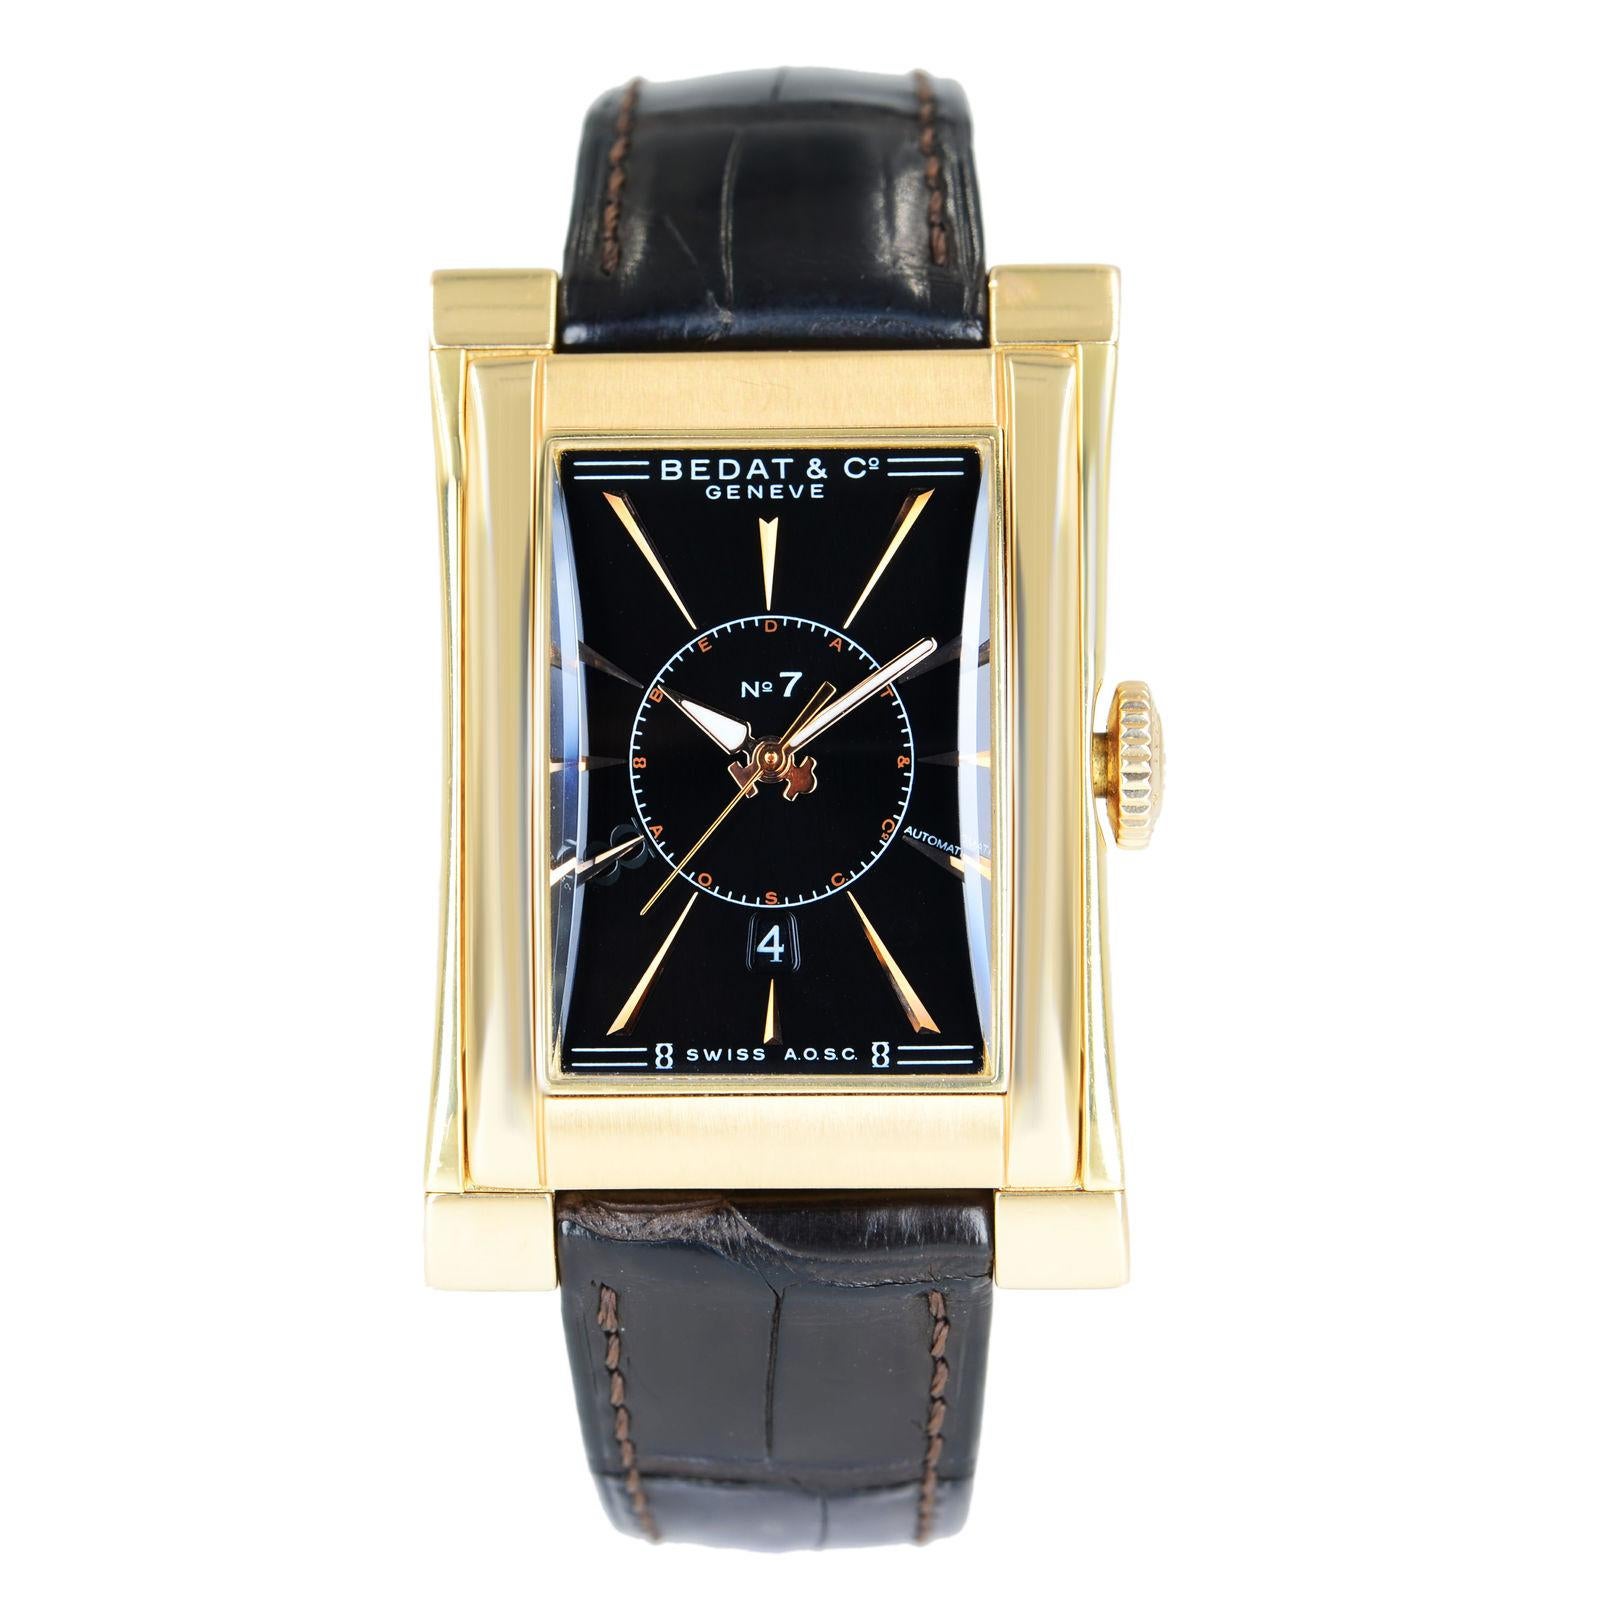 Bedat & Co Nº7 18 Karat Yellow Gold Rectangle Black Dial Automatic Watch Ref 737 For Sale